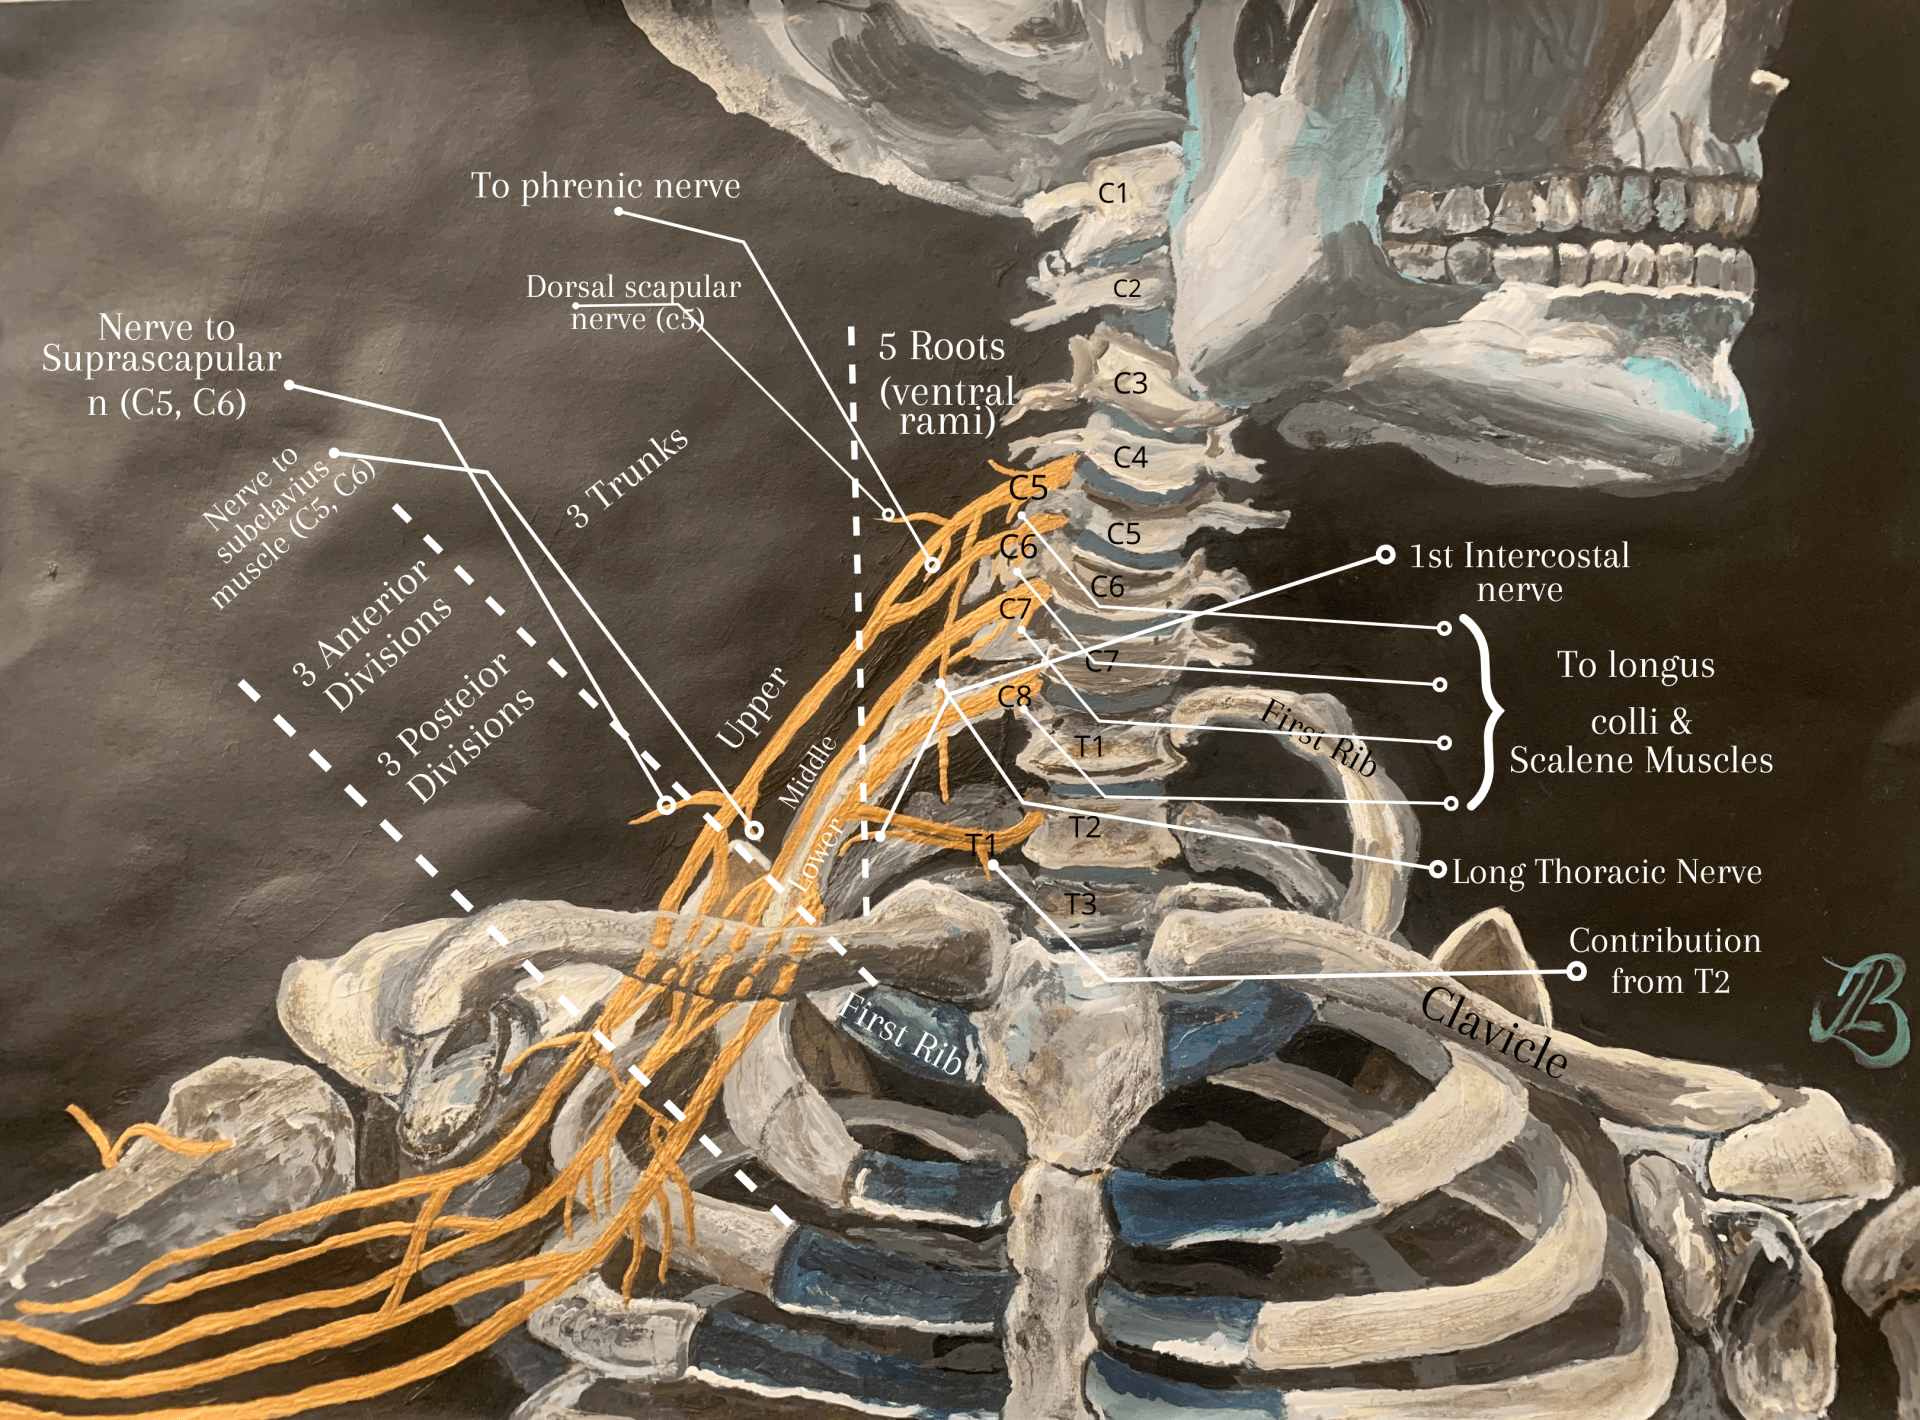 Nerve roots, trunks and divisions